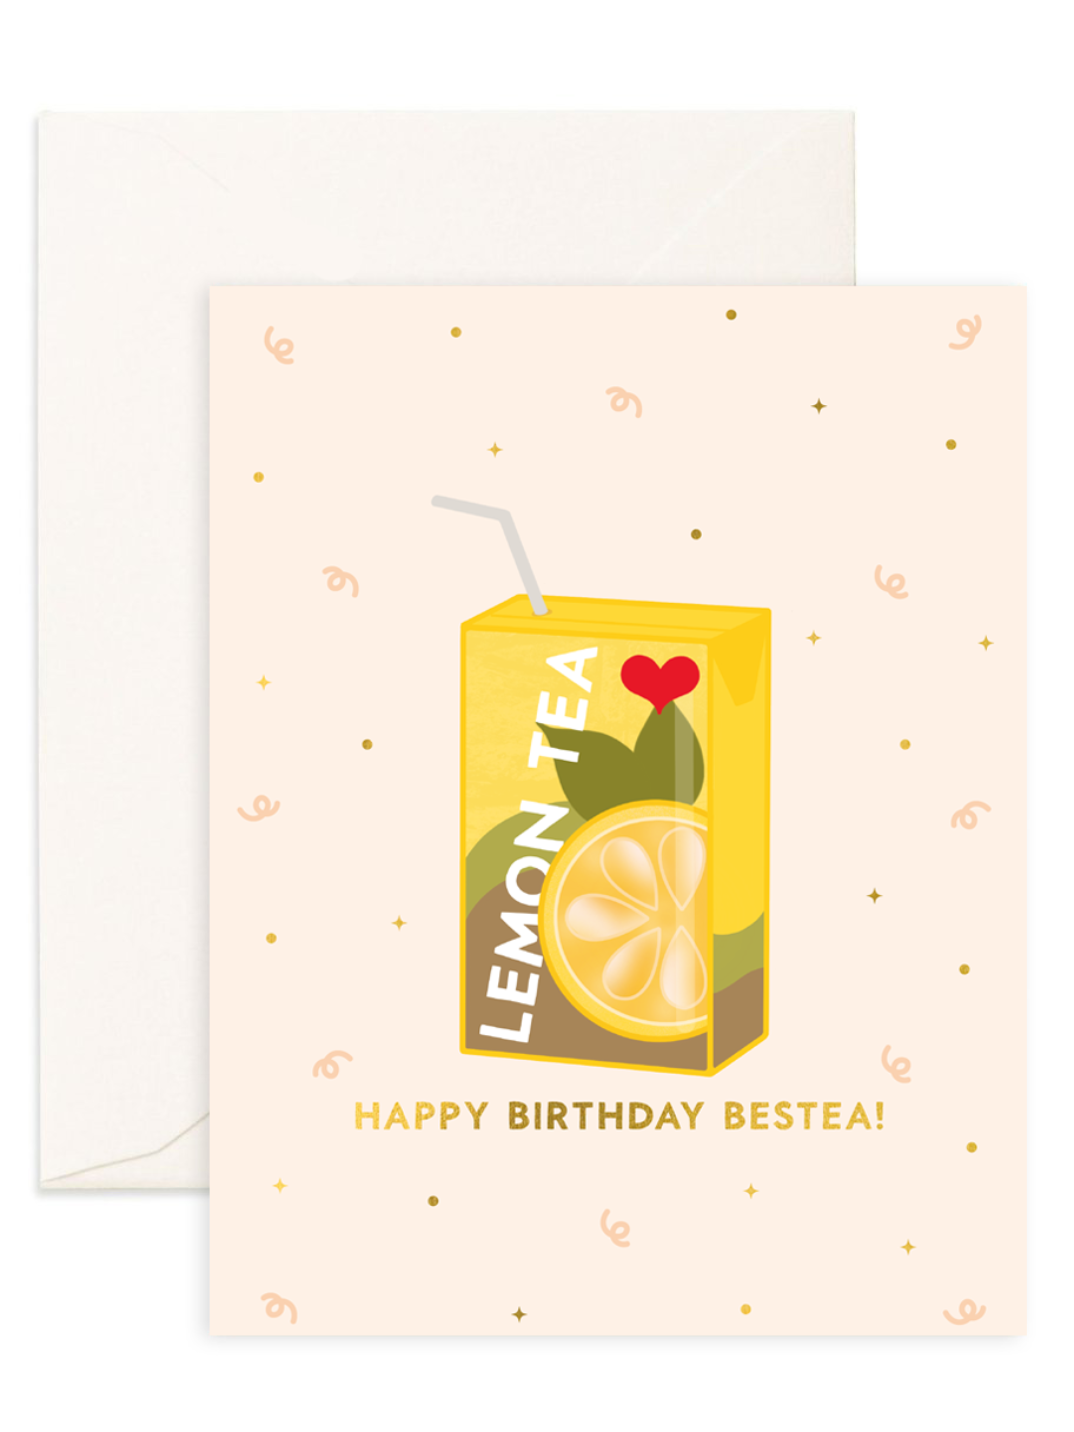 Hong Kong greeting card printed on recycled paper shop eco-friendly gift greeting card for friends really cute design for foodies lemon tea birthday card